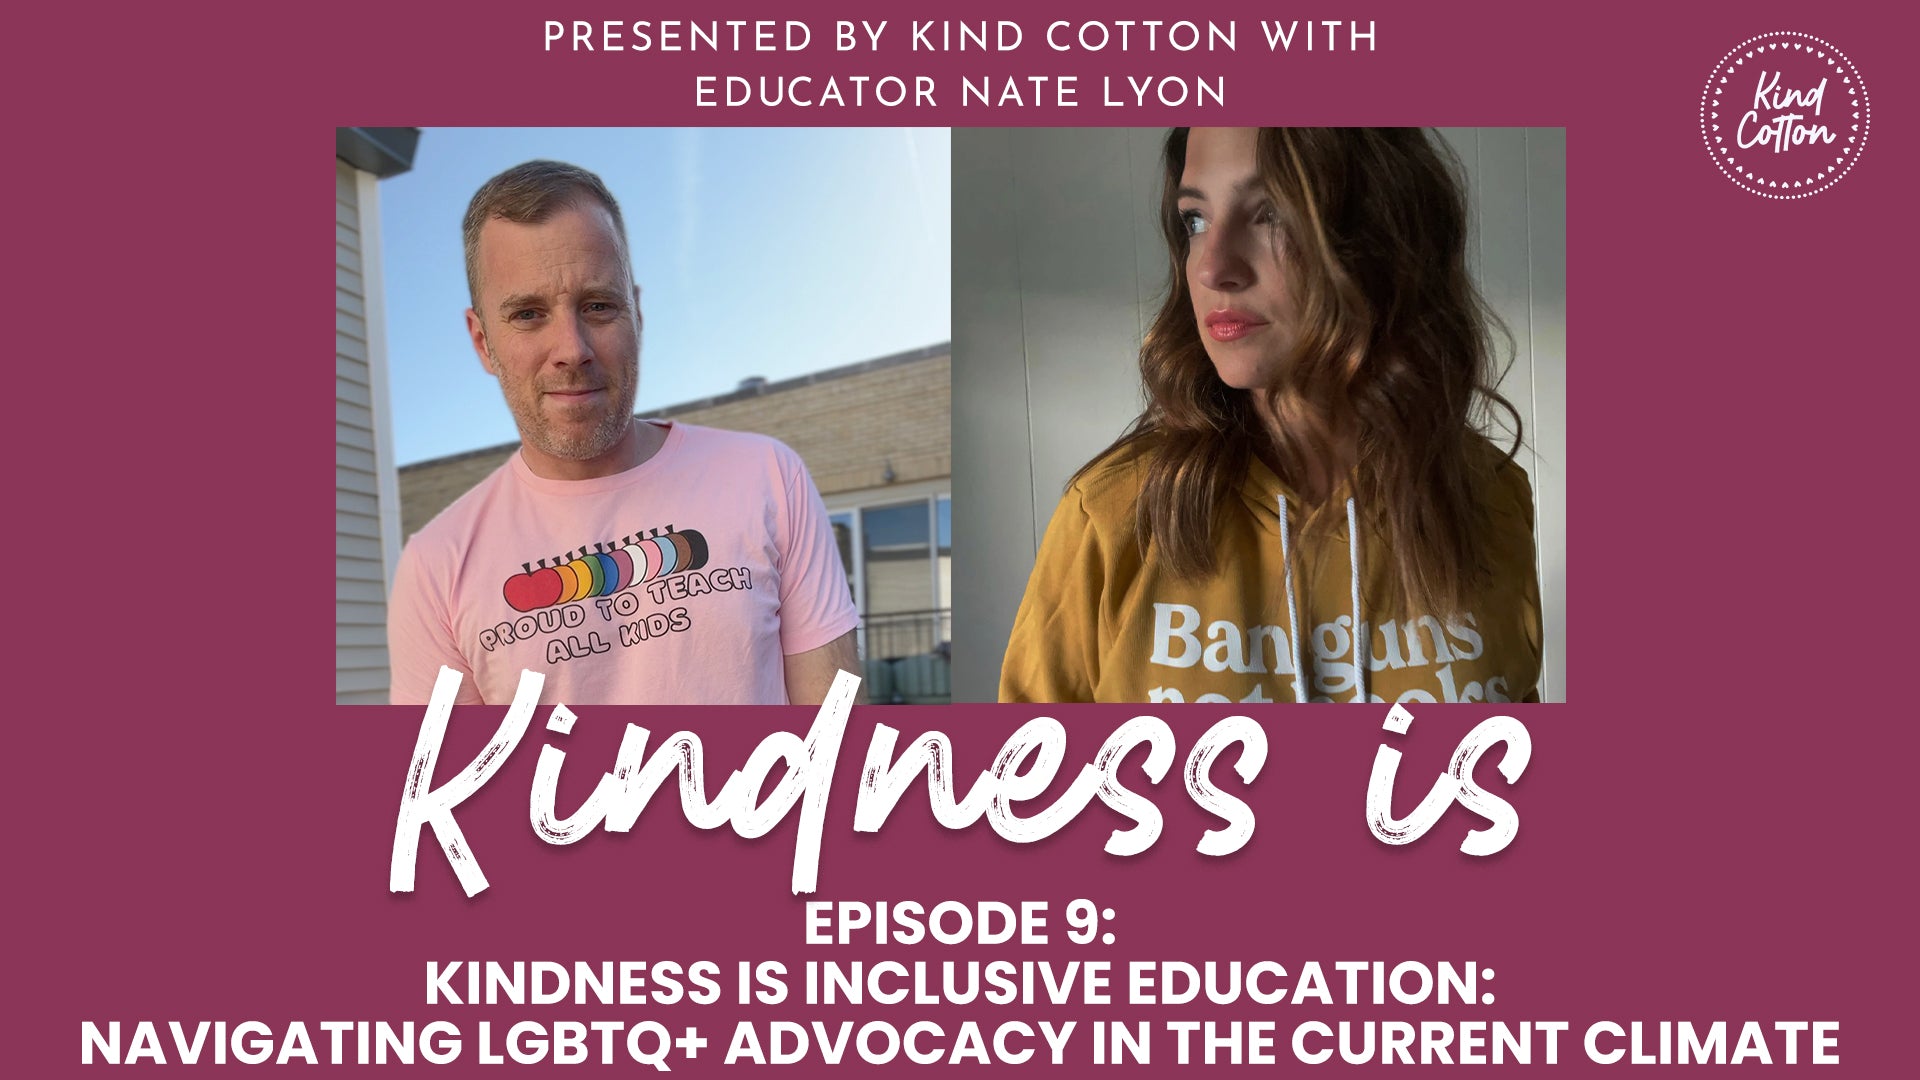 Kindness is Inclusive Education: Navigating LGBTQ+ advocacy in the current climate with educator Nate Lyon